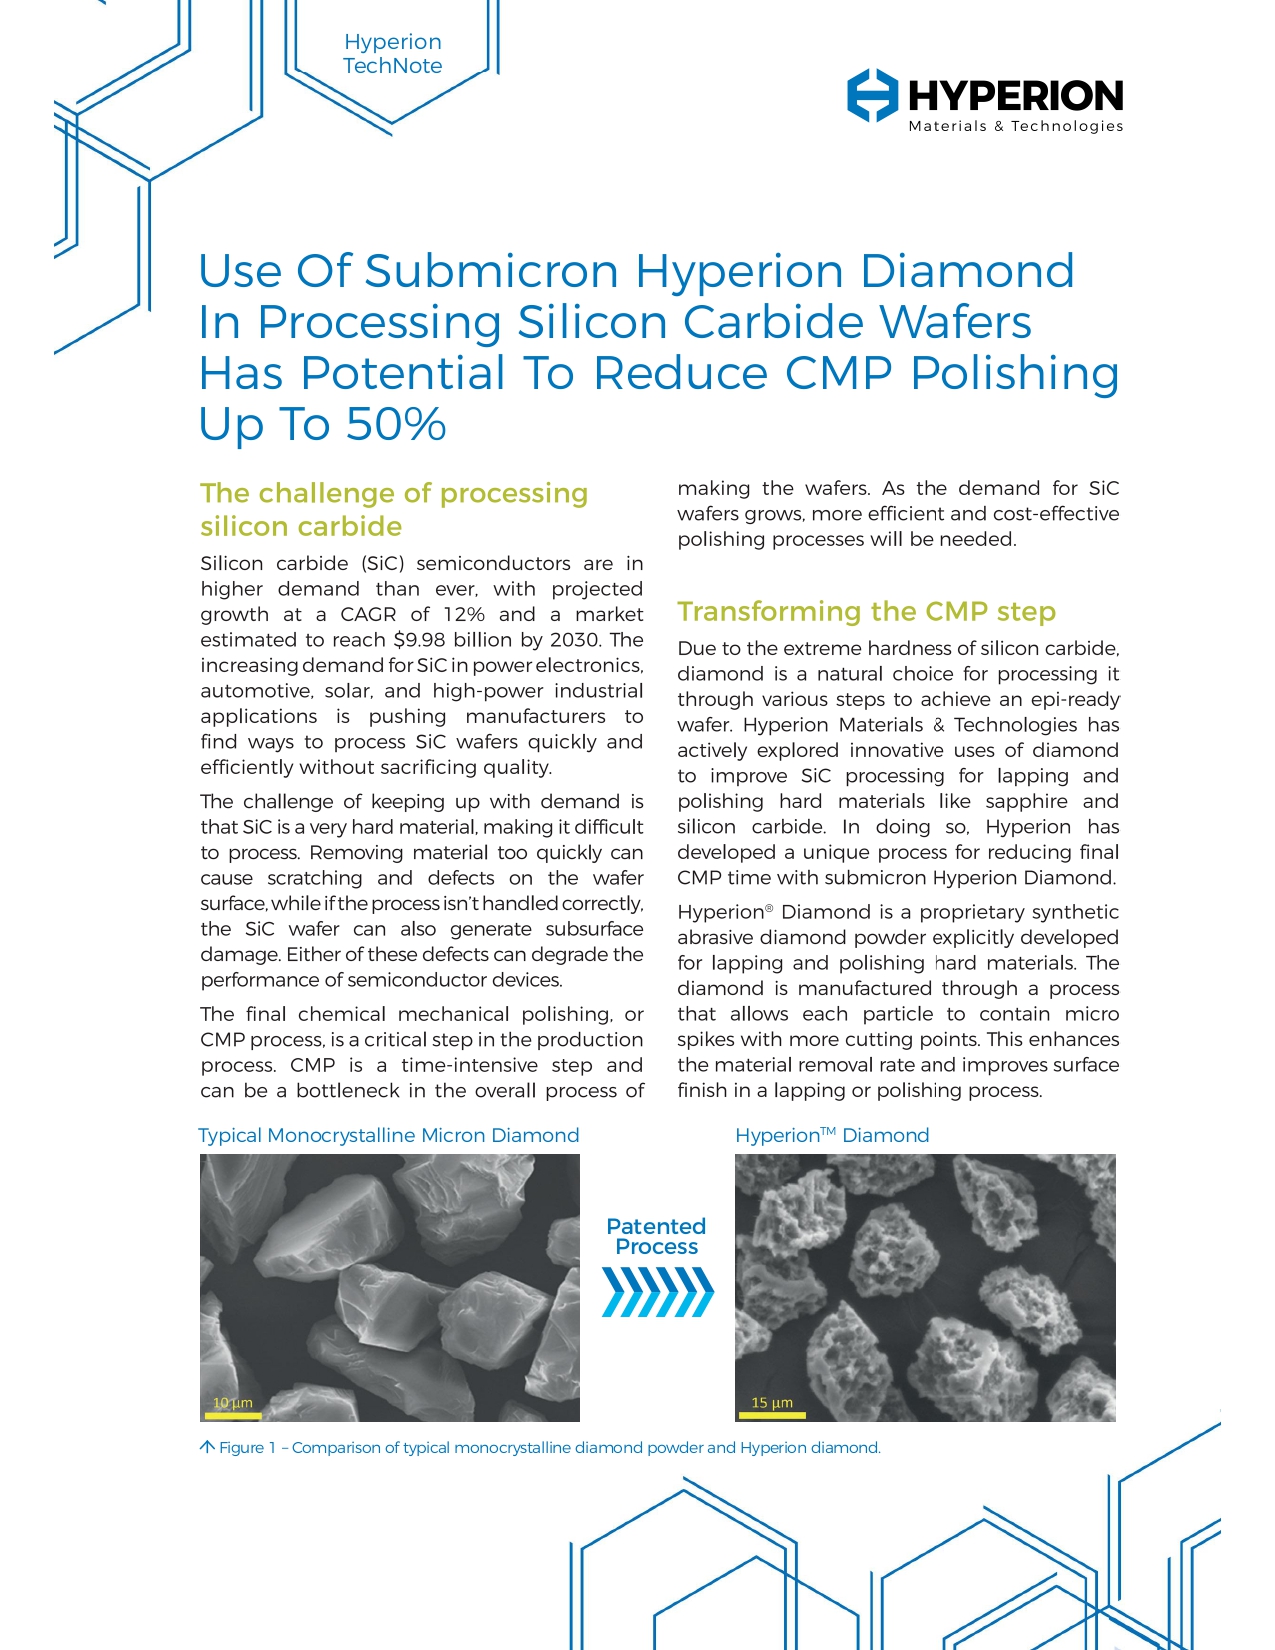 Hyperion enables improved silicon carbide wafer production with reduced CMP polishing